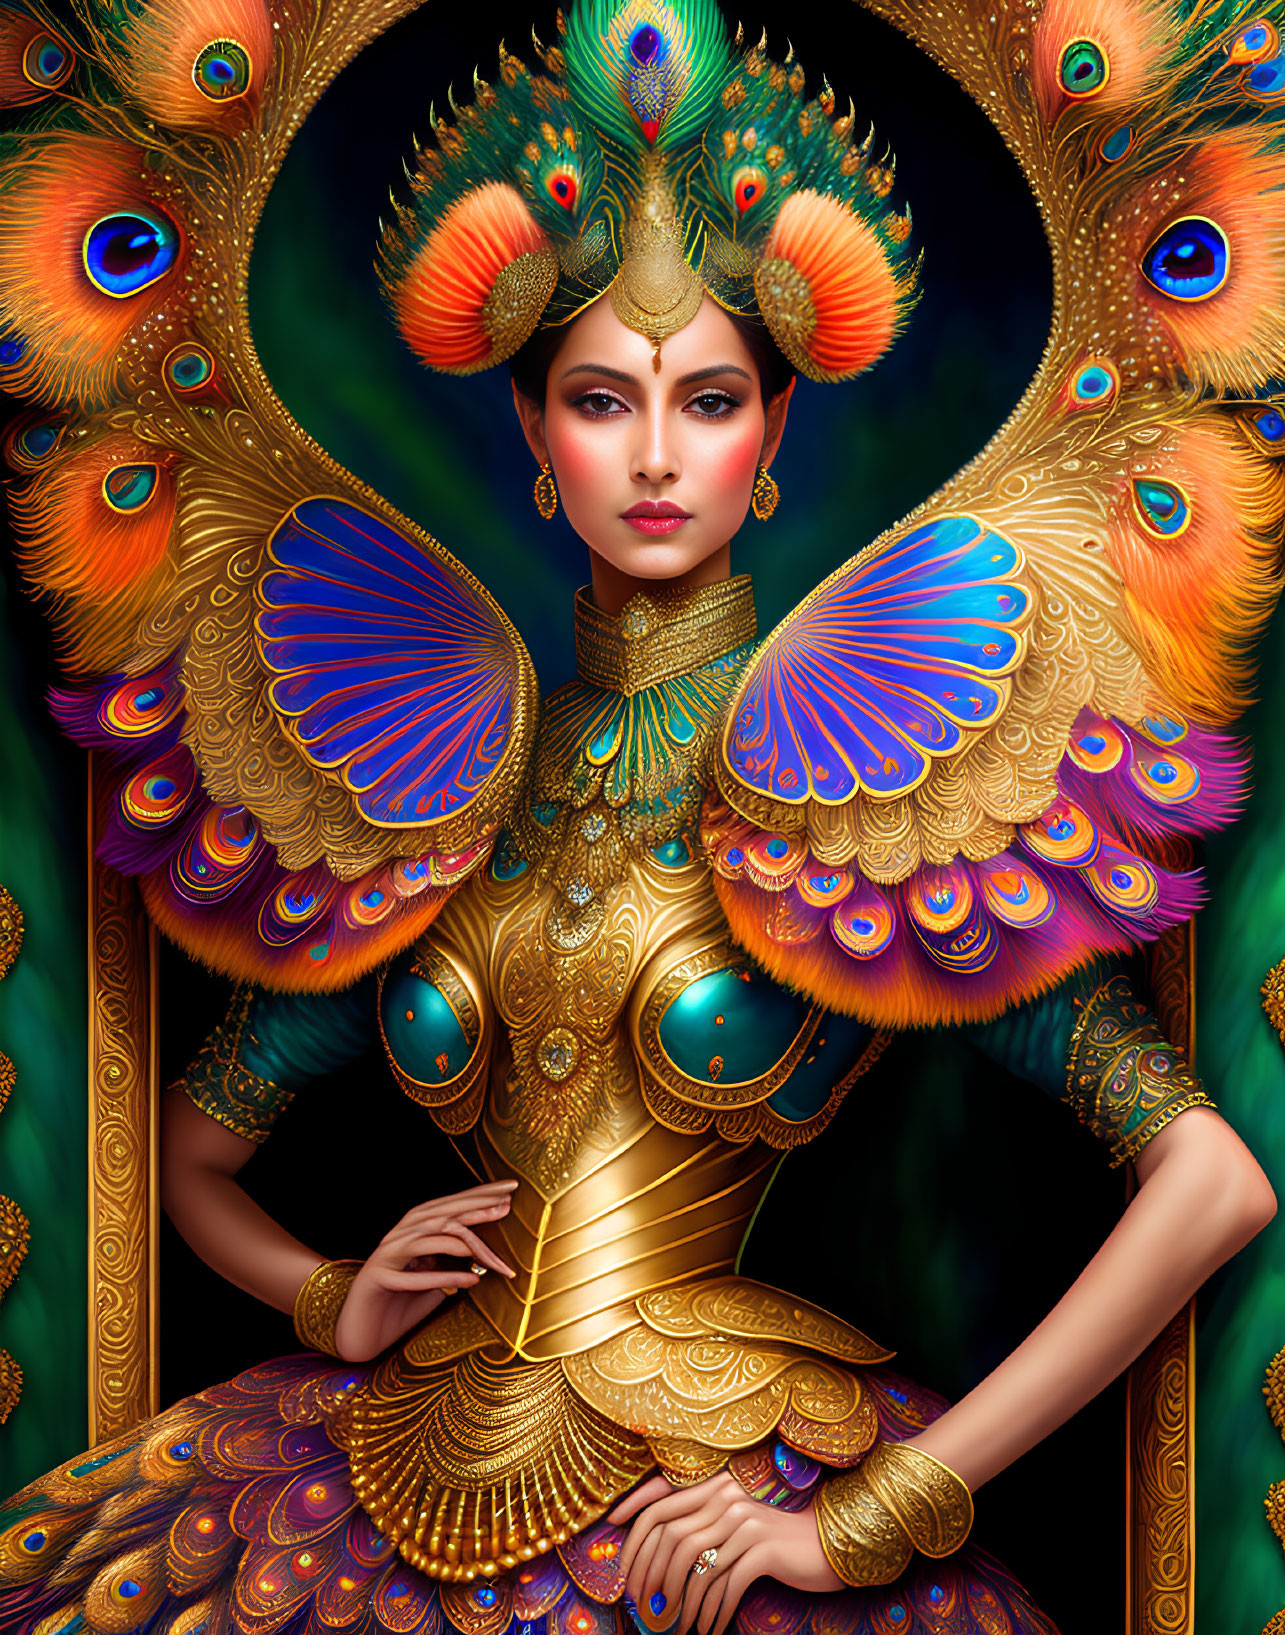 Regal woman in peacock-themed attire on dark background